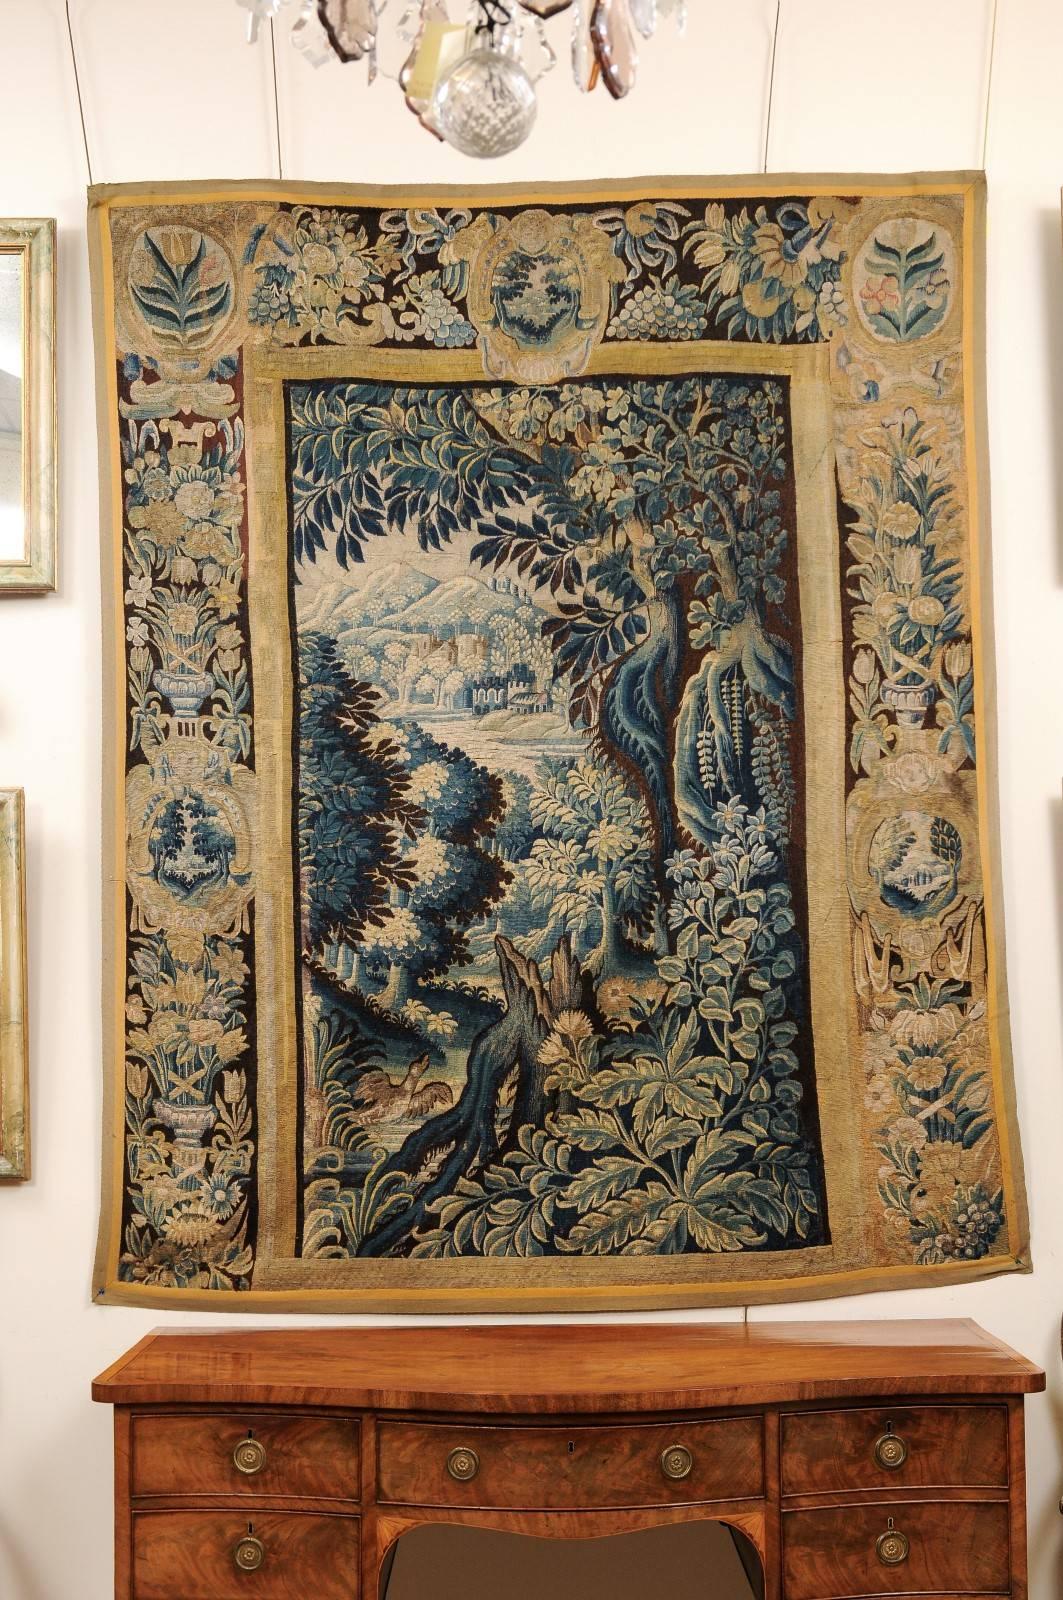 A 18th century French aubusson tapestry featuring foliage boarder with center oriented landscape scene in teal blue, brown and tan hues.